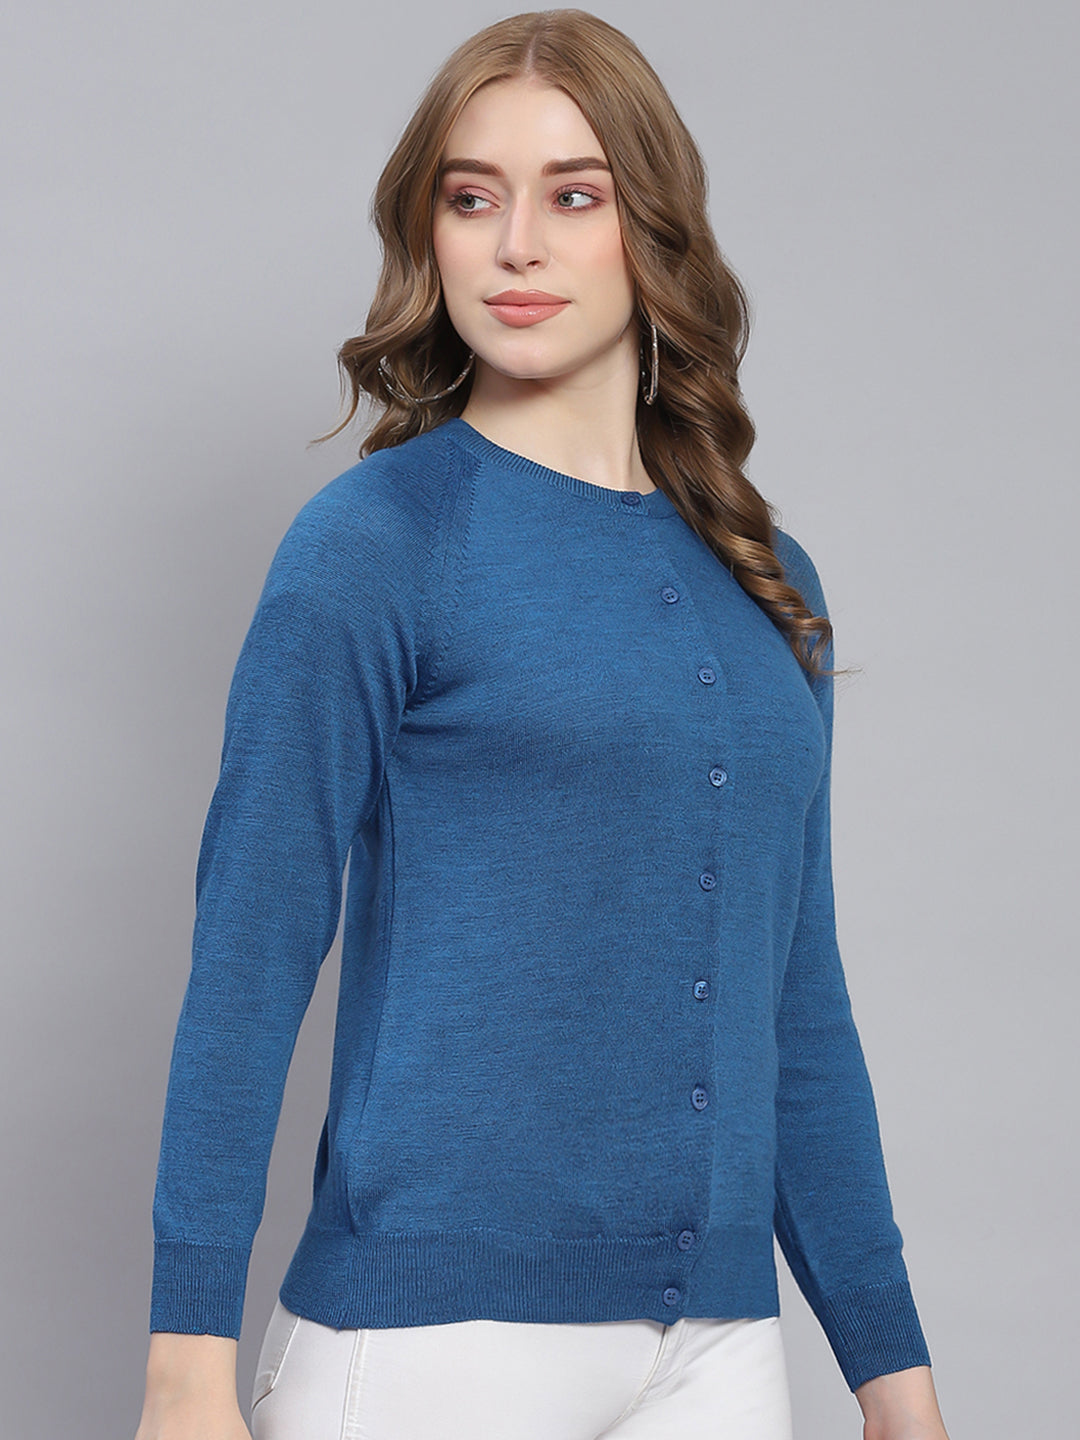 Women Teal Blue Solid Round Neck Full Sleeve Cardigans